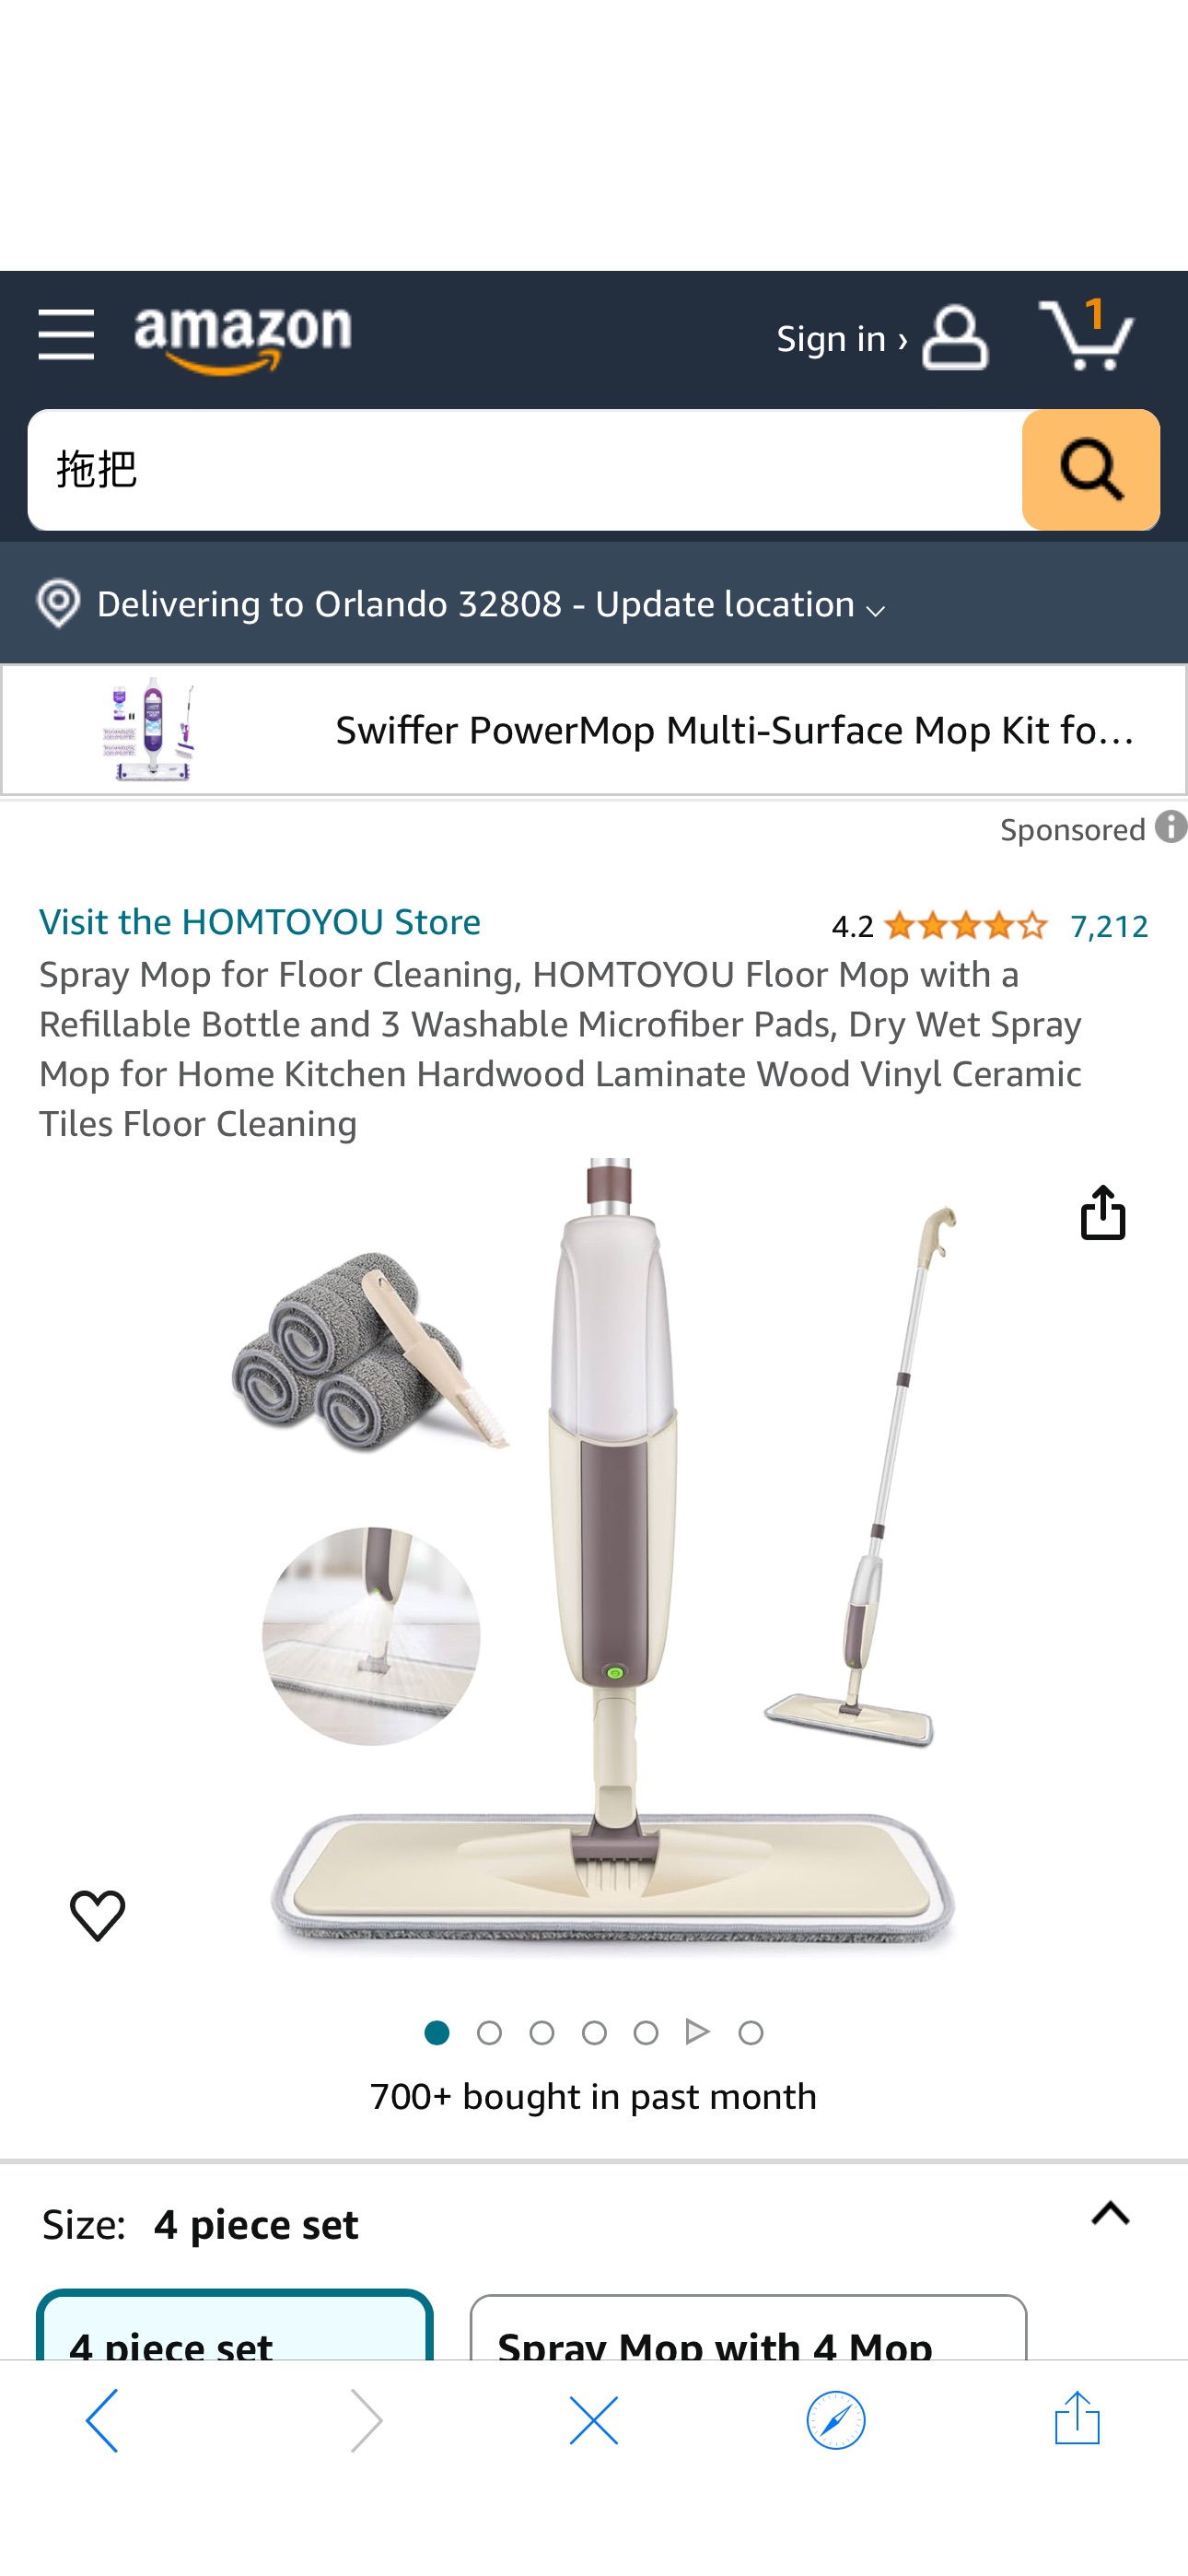 Amazon.com: Spray Mop for Floor Cleaning, HOMTOYOU Floor Mop with a Refillable Bottle and 3 Washable Microfiber Pads, Dry Wet Spray Mop for Home Kitchen Hardwood Laminate Wood Vinyl Ceramic Tiles Floo